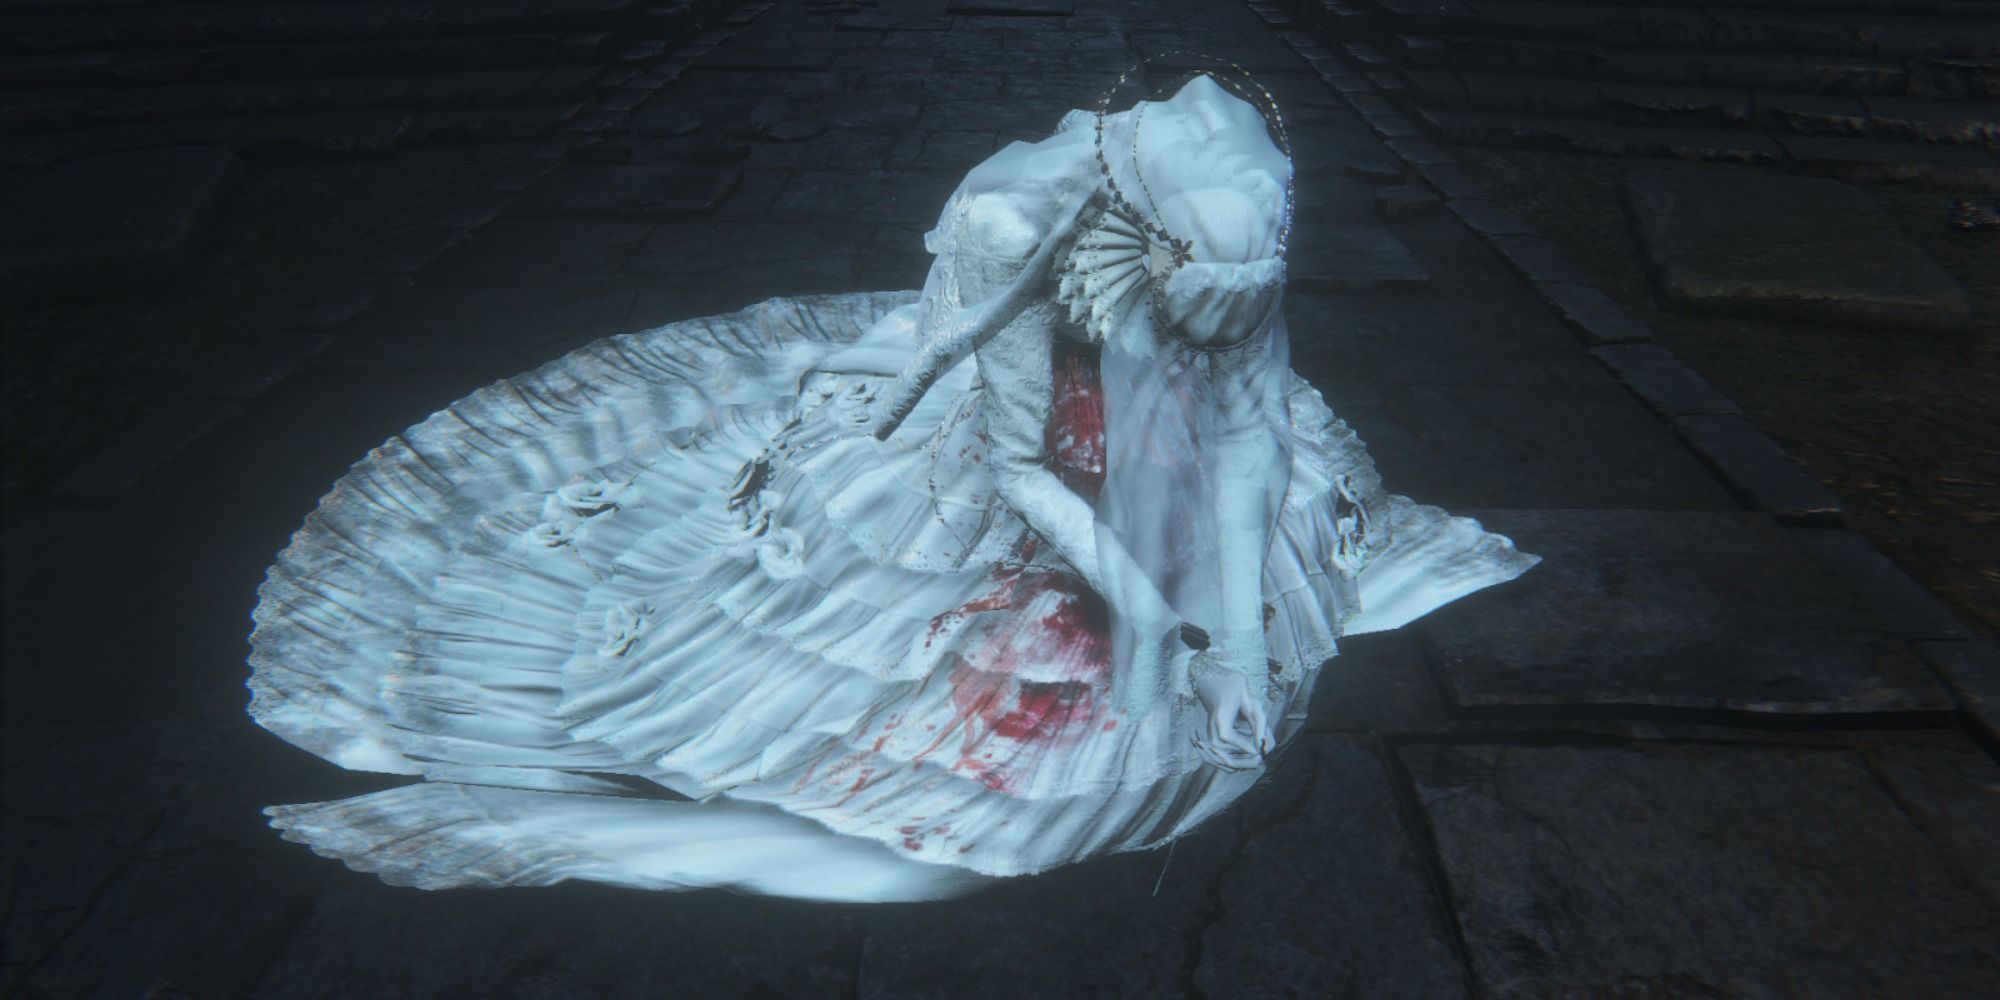 Yharnam, Pthumerian Queen from Bloodborne - a lady dressed in all white with a bloodstained dress